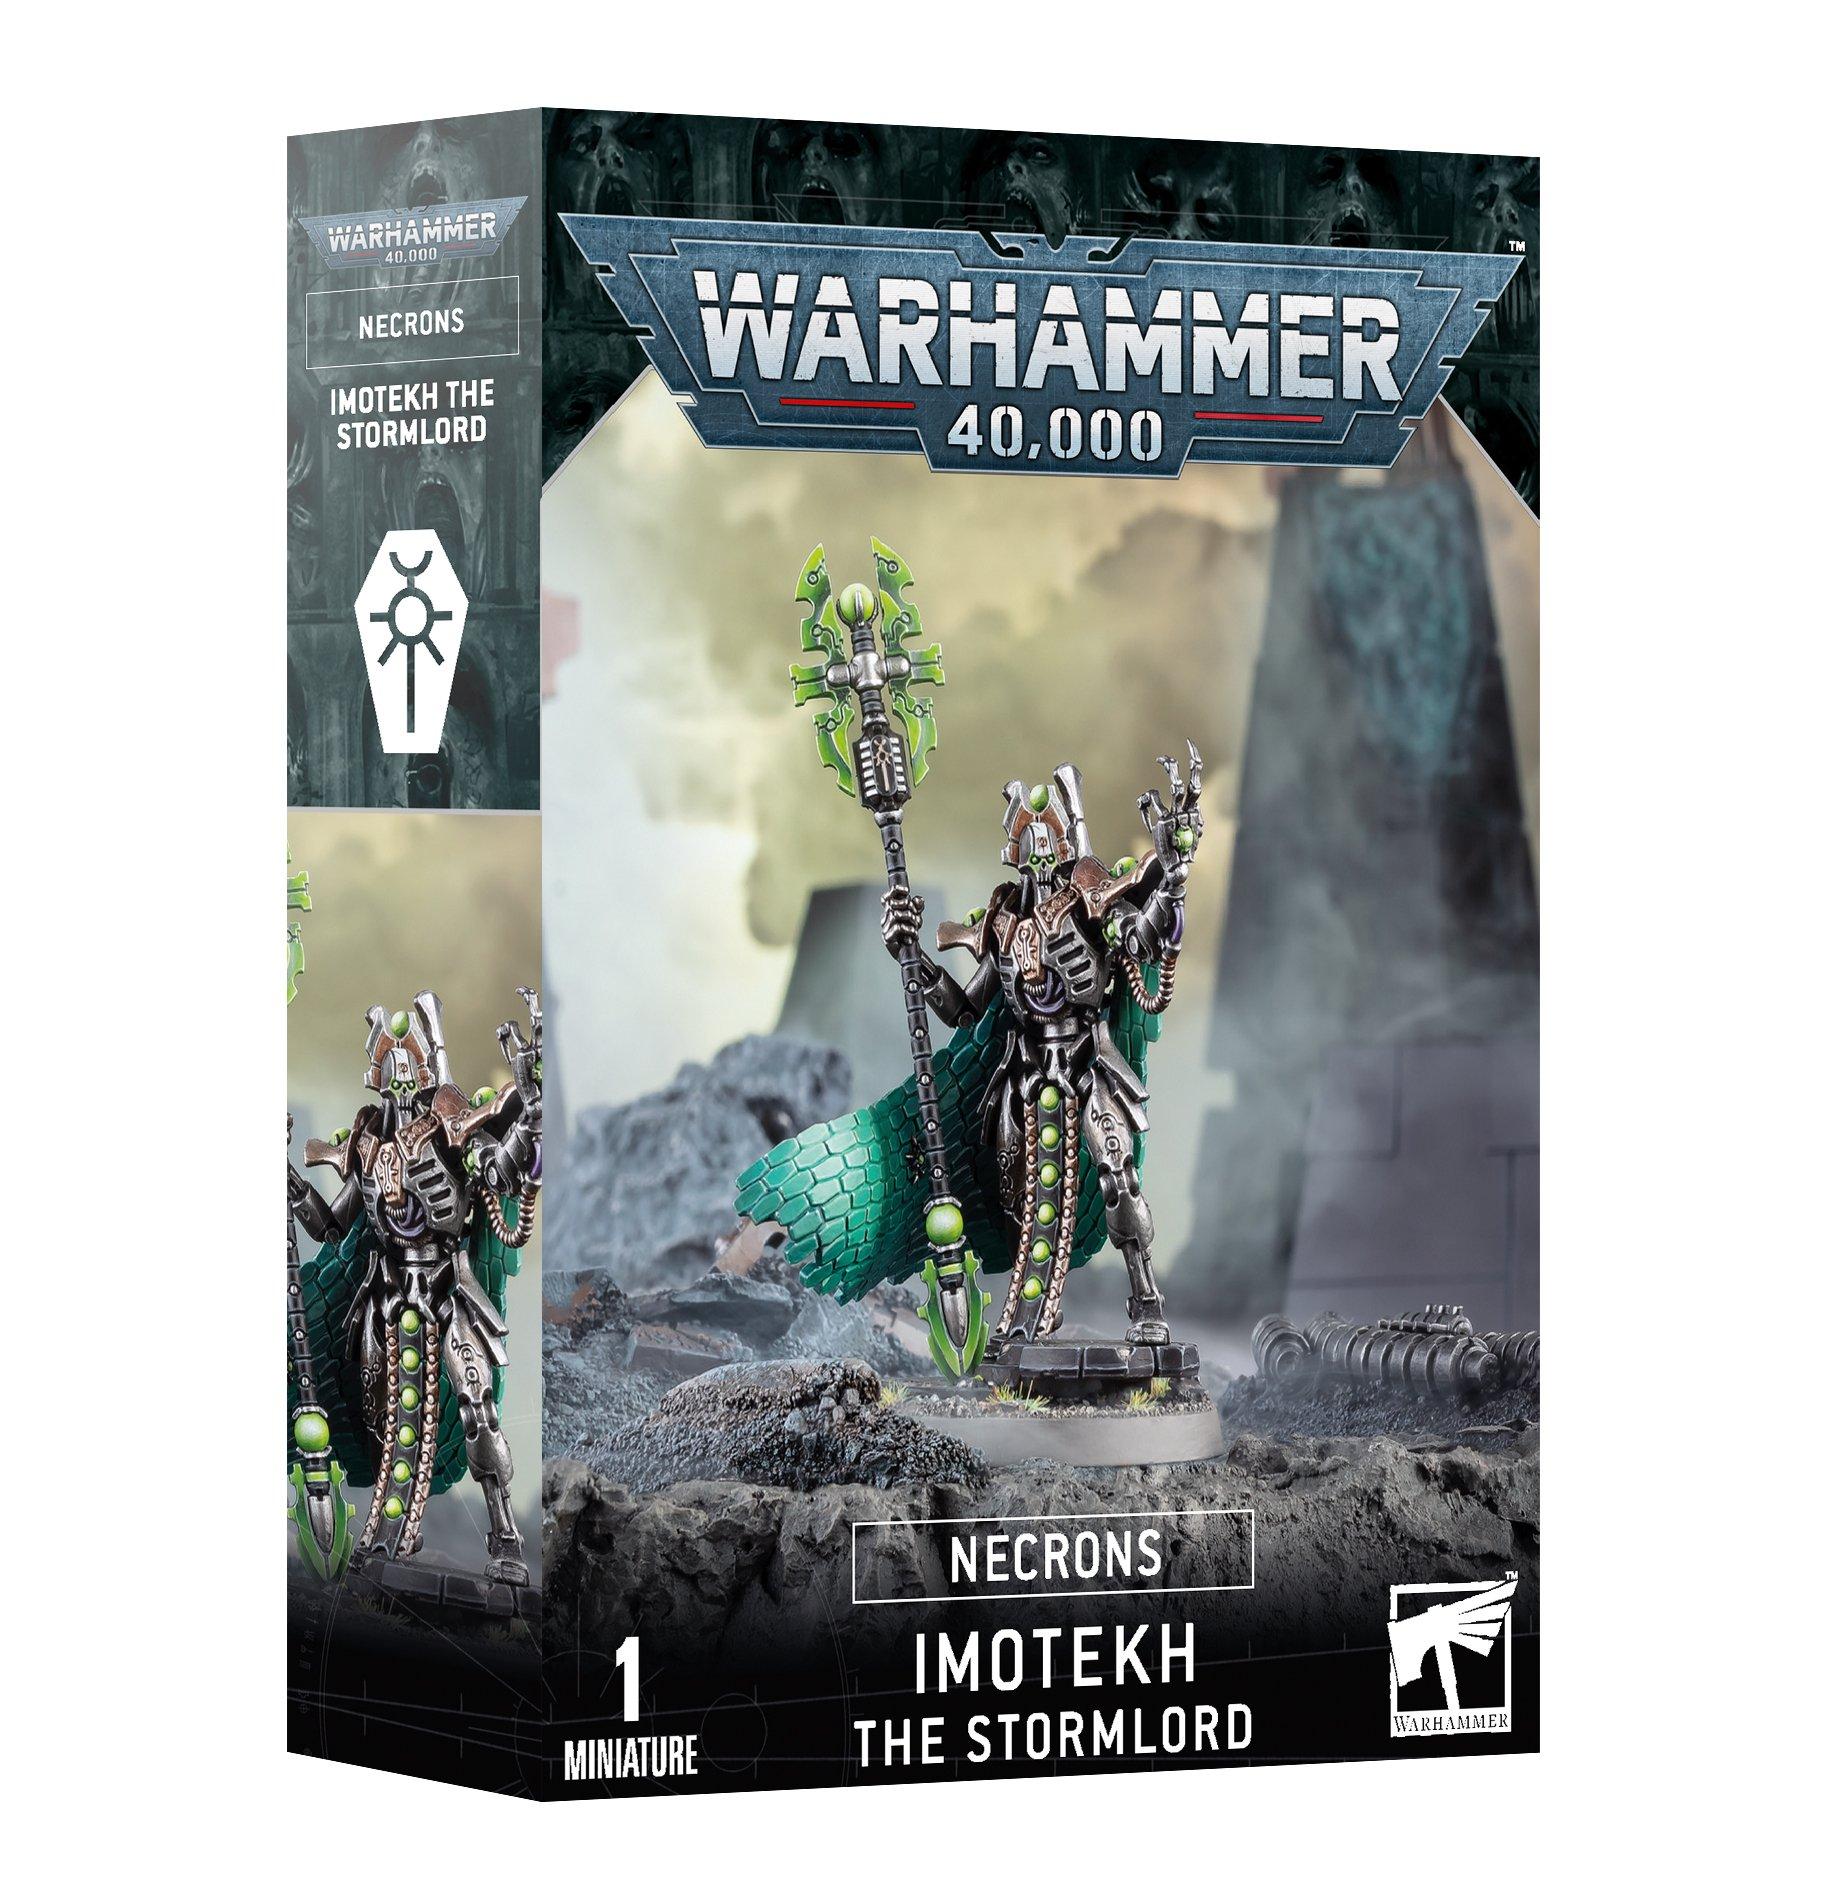 Warhammer 40,000 - Necrons: Imotekh, The Stormlord